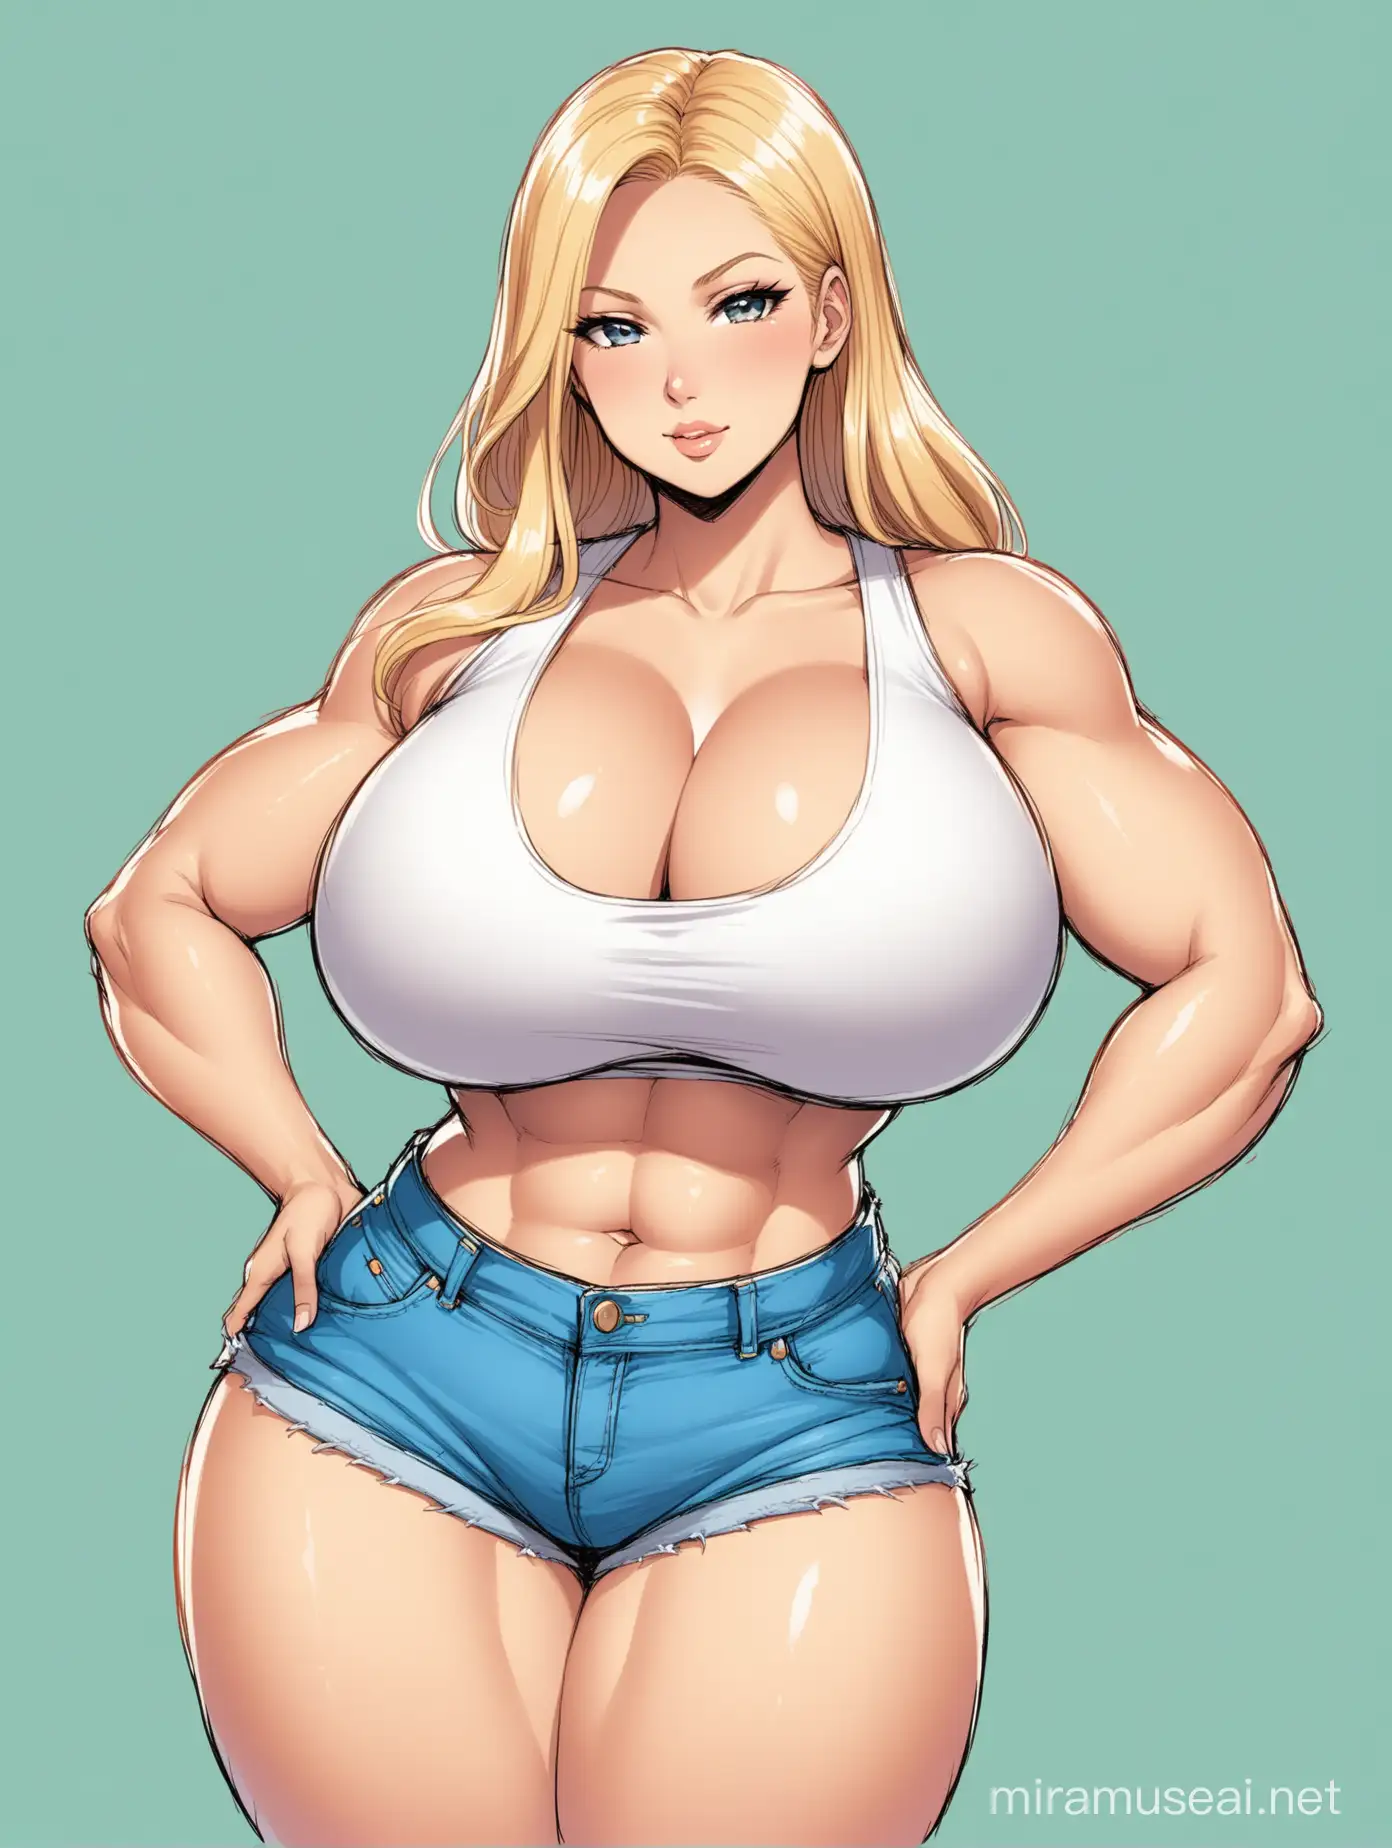 Full color drawing of a blond woman with a beautiful, delicate face, huge chest, extremely large chest, enormous chest, colossal chest, very thin waist, wearing casual clothing, including a top and jean shorts